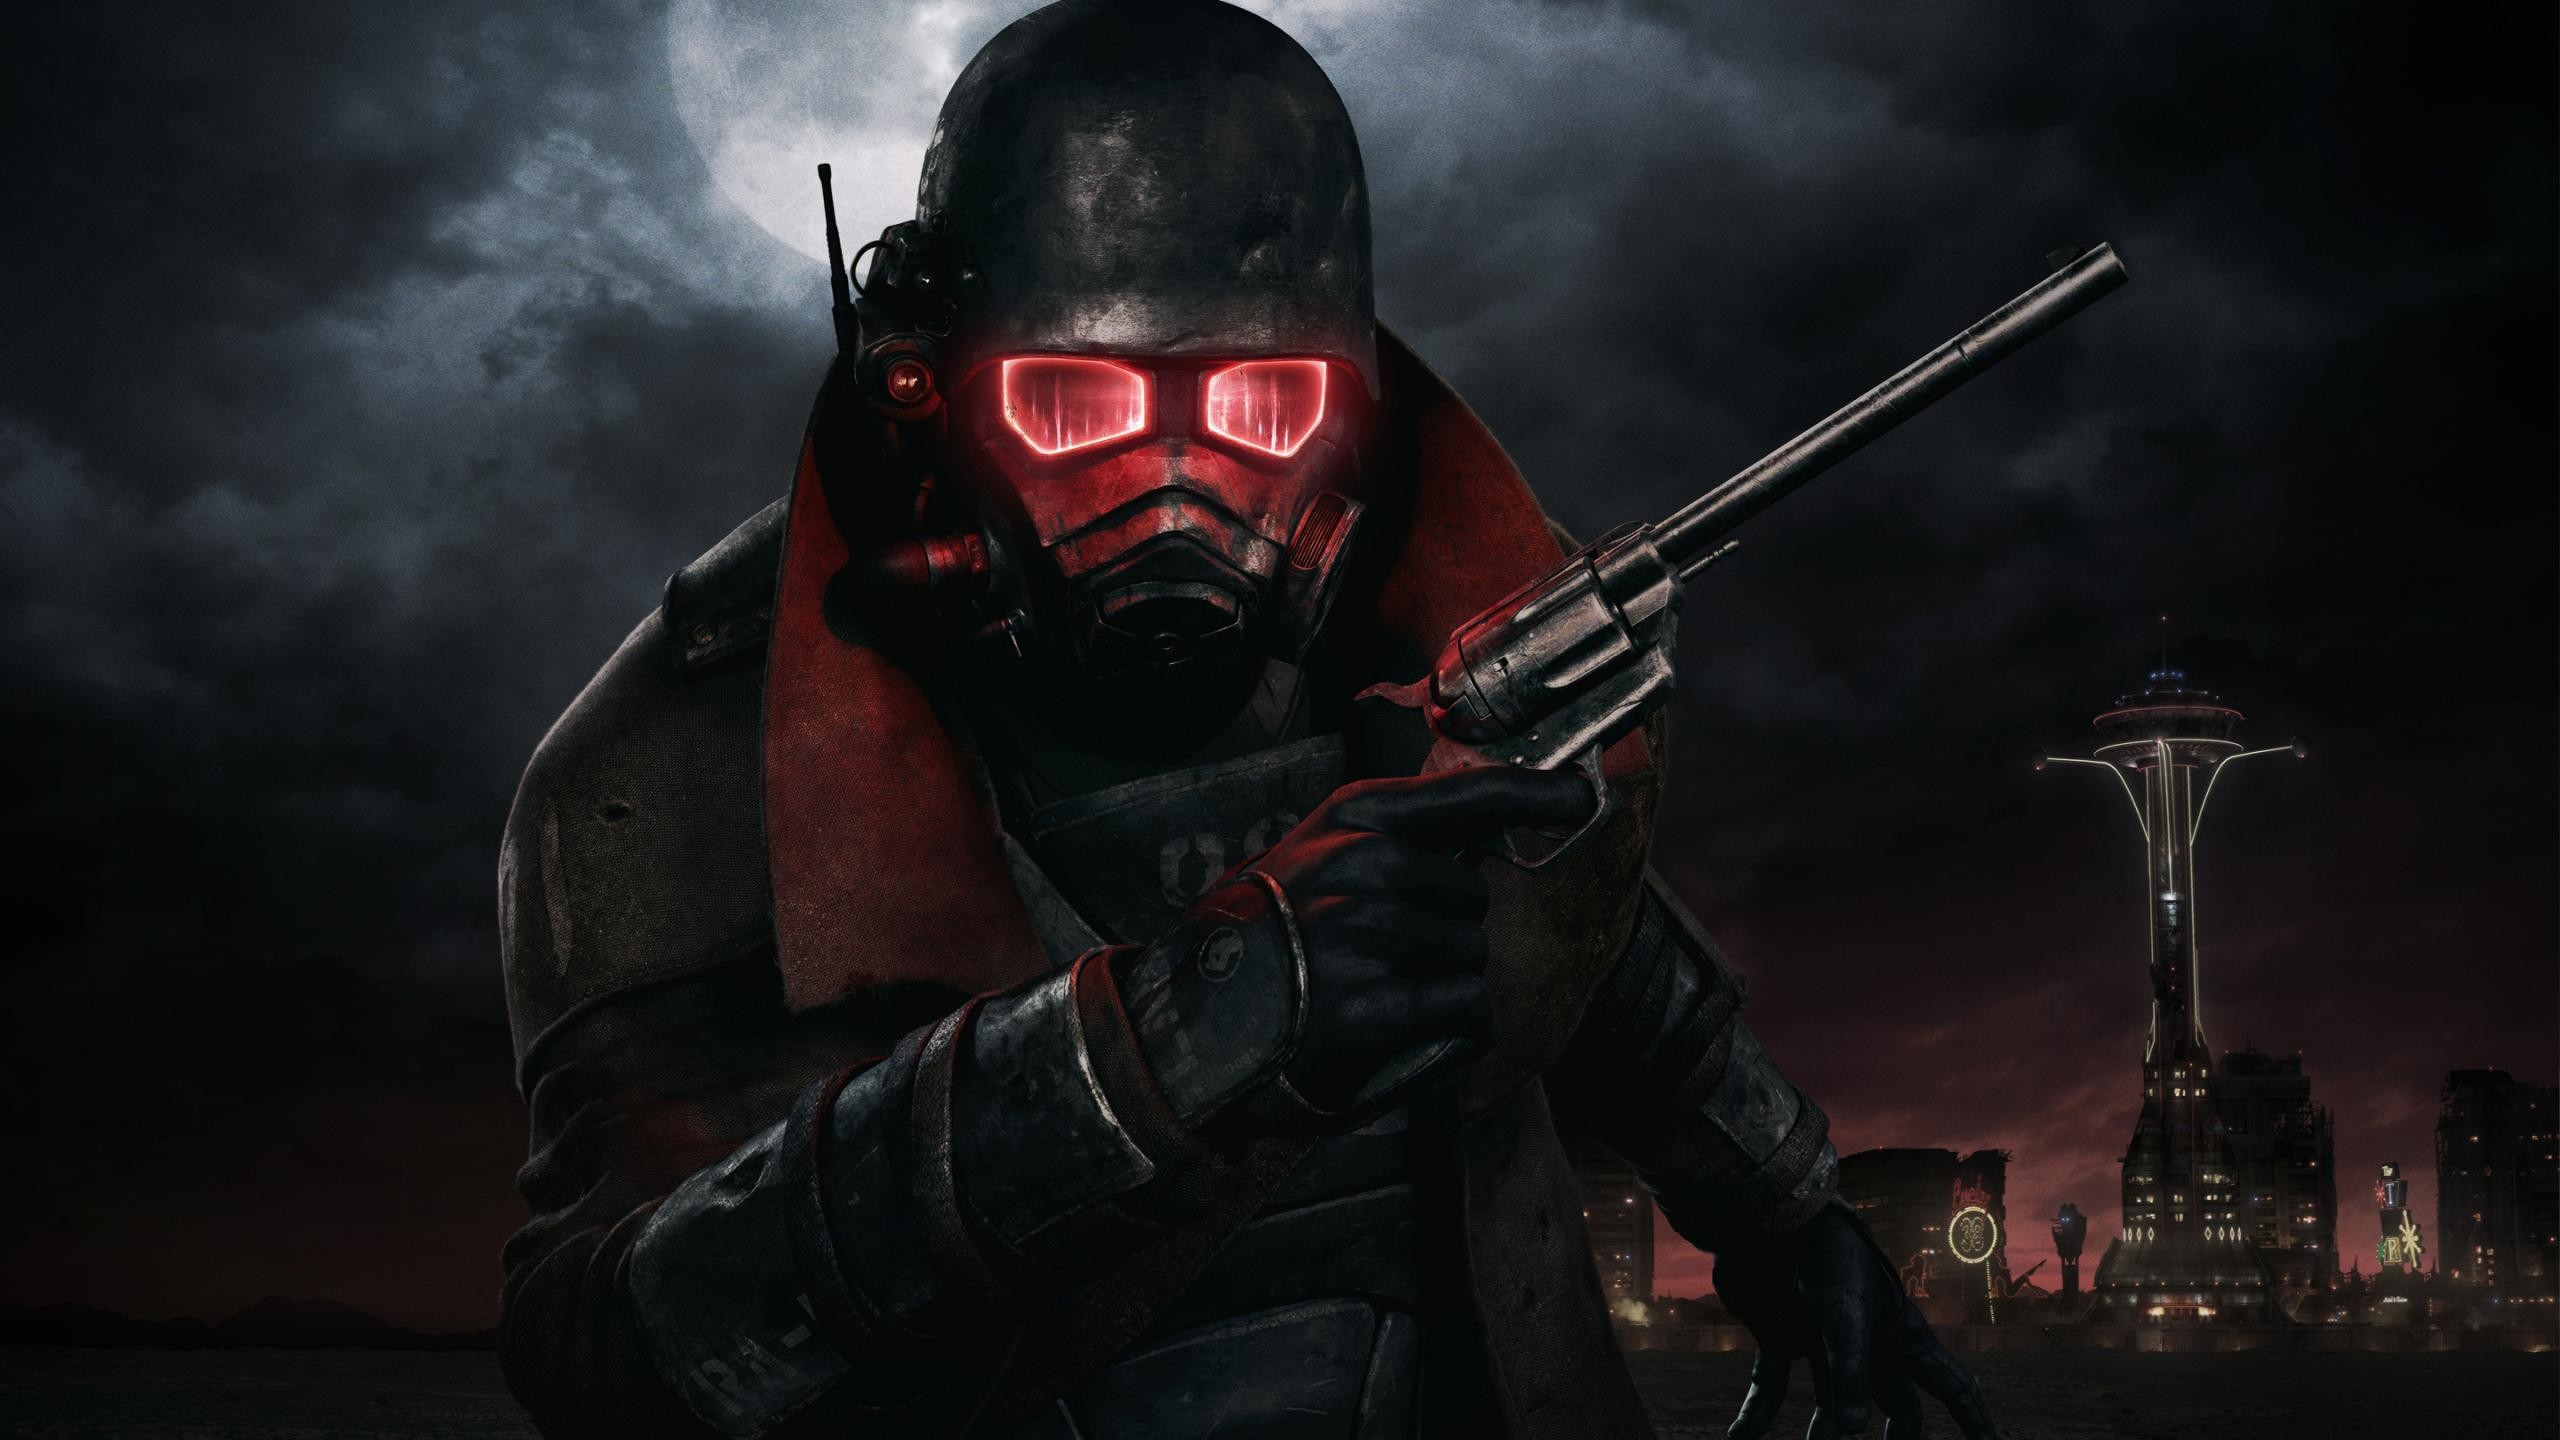 2560x1440 Fallout New Vegas Game Wallpaper size available for downloads